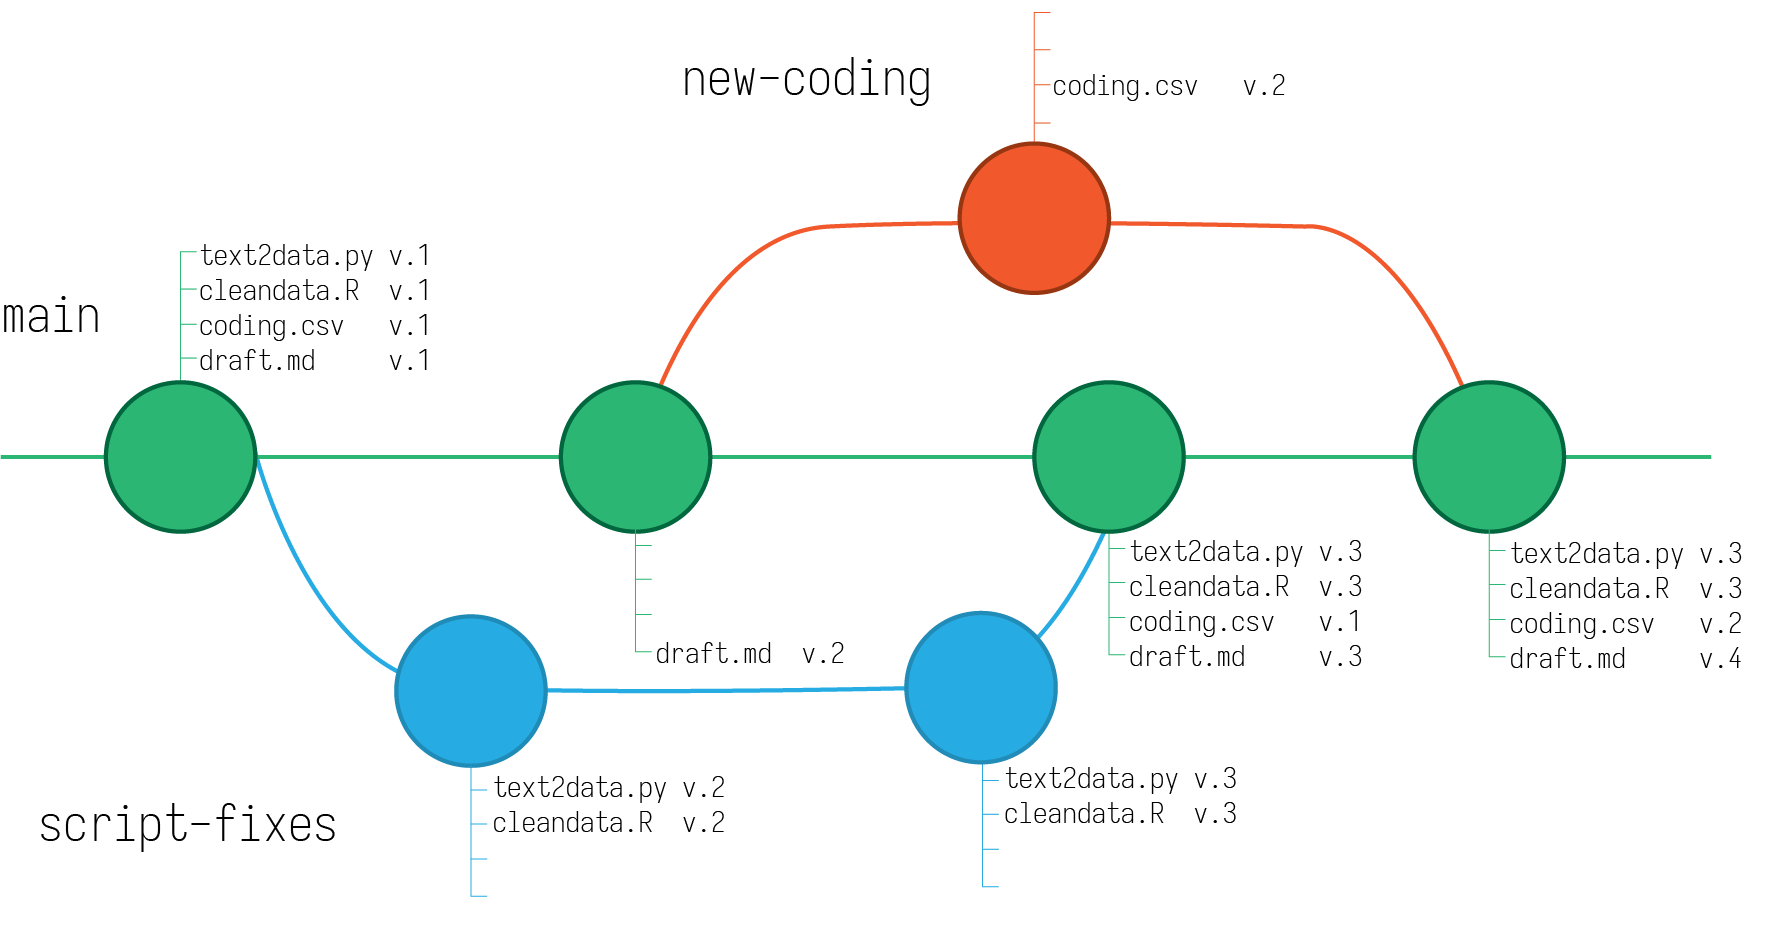 Branching versions of a project repository.